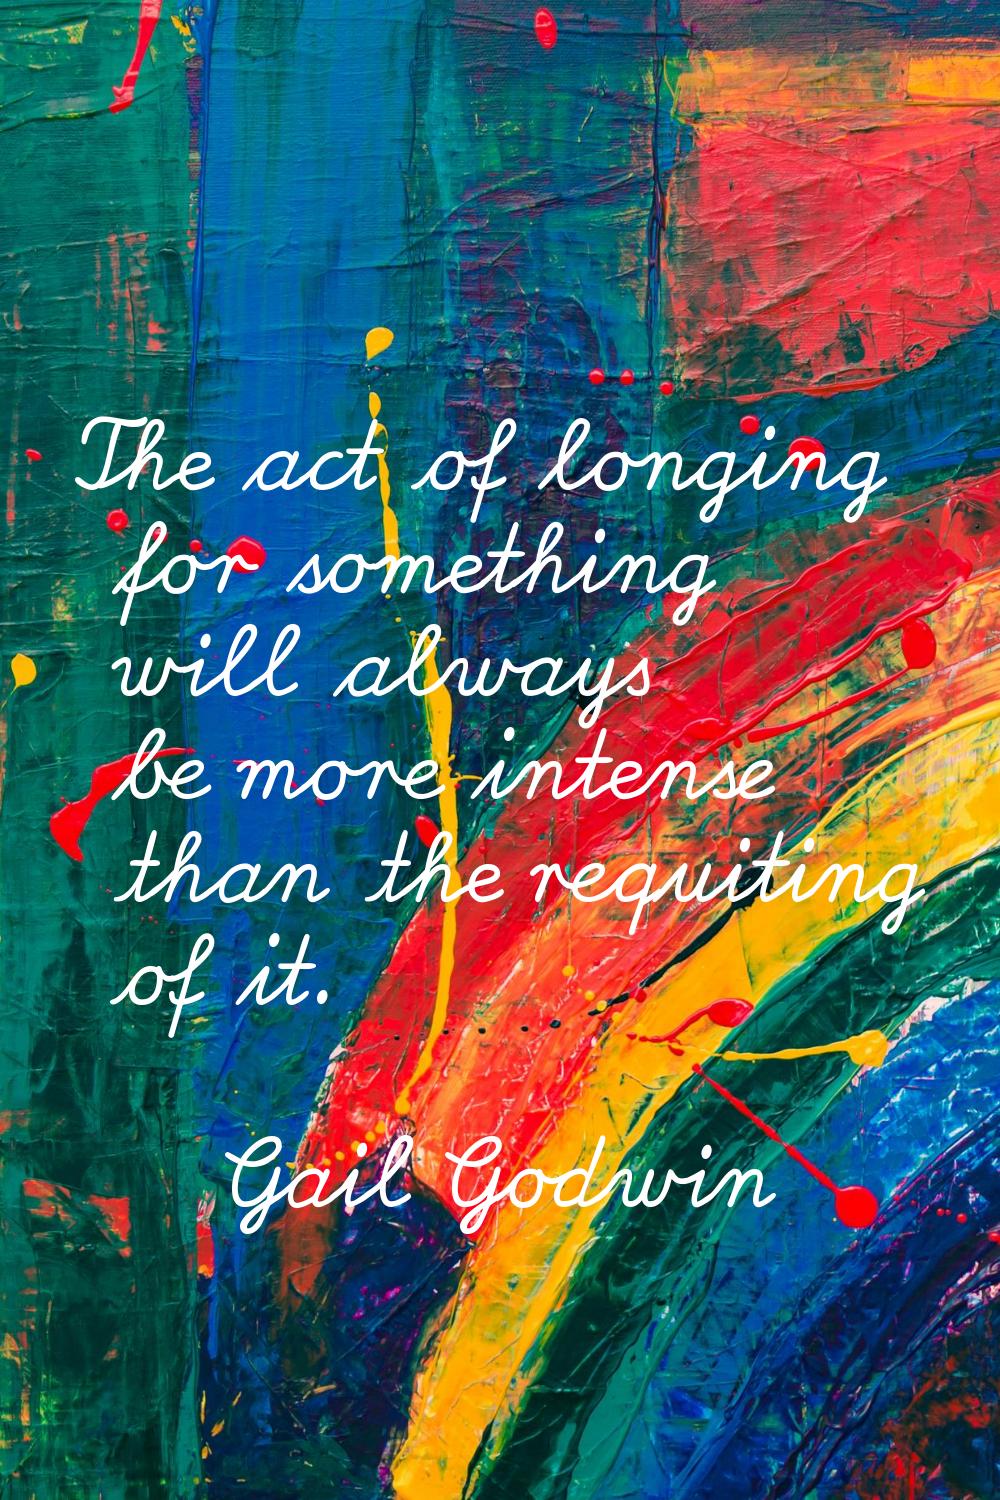 The act of longing for something will always be more intense than the requiting of it.